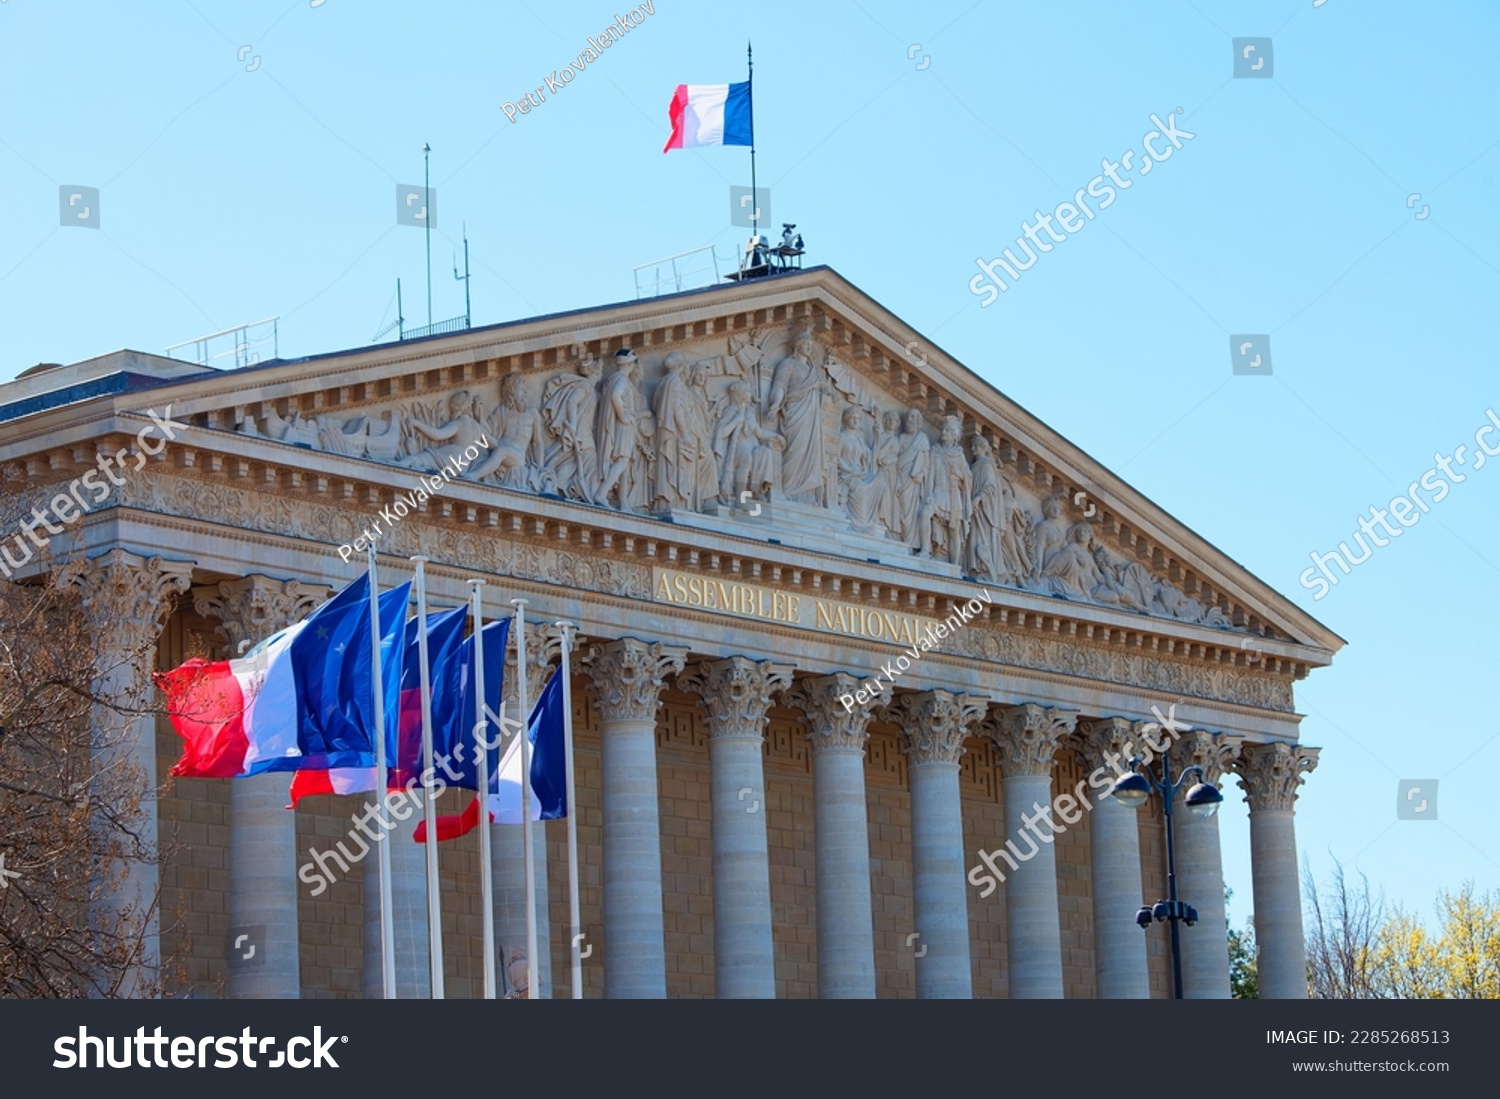 The French national Assembly-Bourbon palace the lower house of the parliament , Paris, France. #2285268513